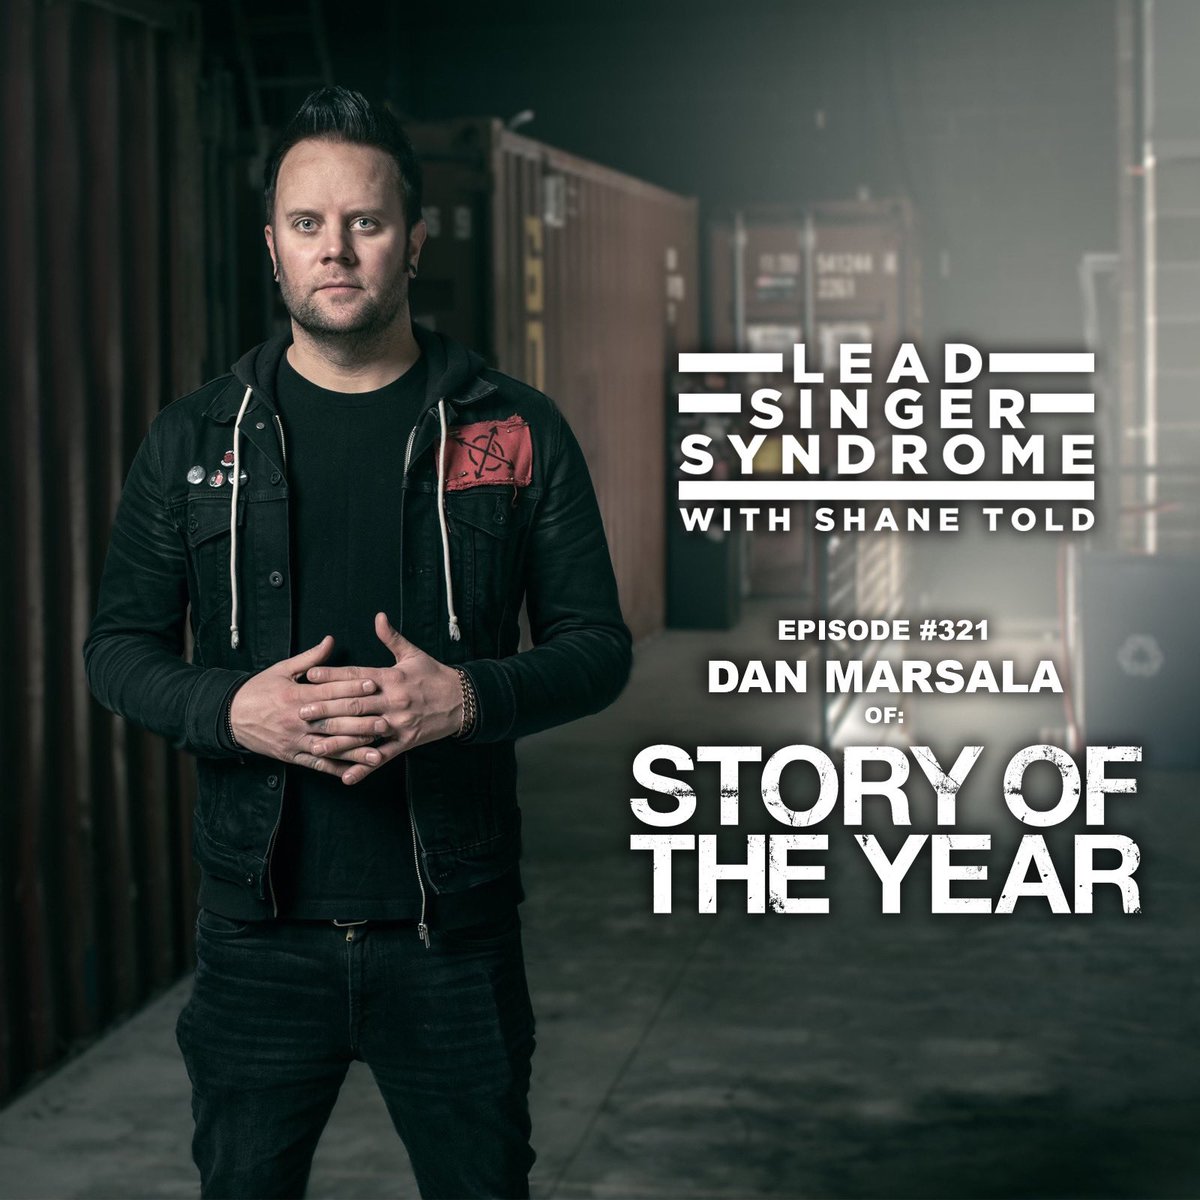 🚨Dan from @StoryoftheYear joins us for Ep 321! We dig deep into what it's been like to have such a crazy path in the music industry for their incredible career. Their new album 'Tear Me To Pieces' is OUT NOW, & catch them on tour with Yellowcard this summer in the USA 🍻